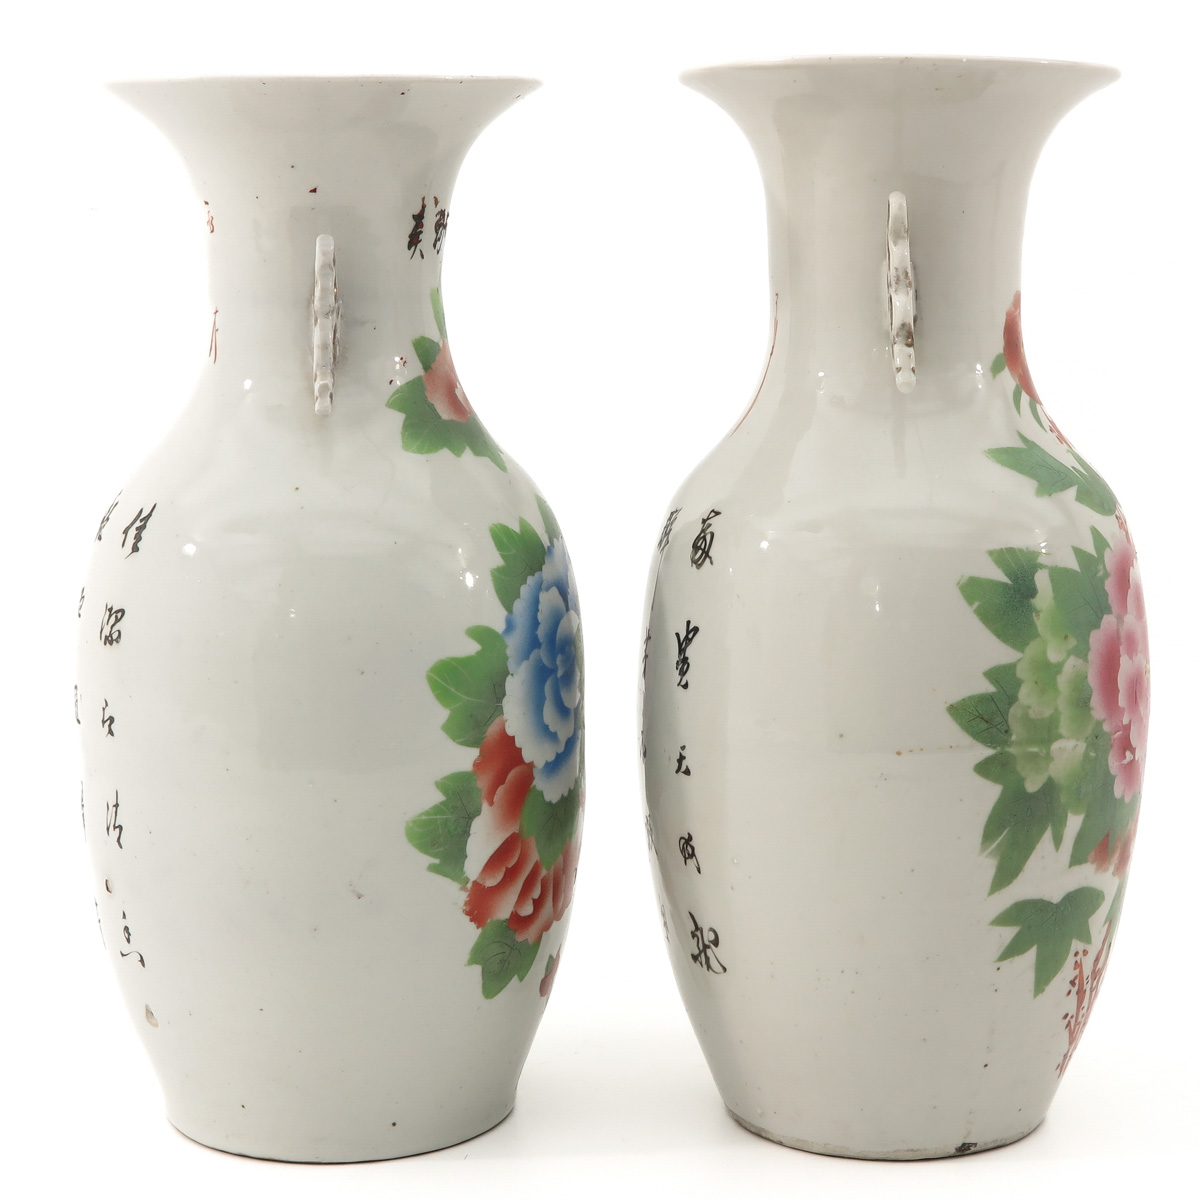 A Pair of Polychrome Decor Vases - Image 4 of 10